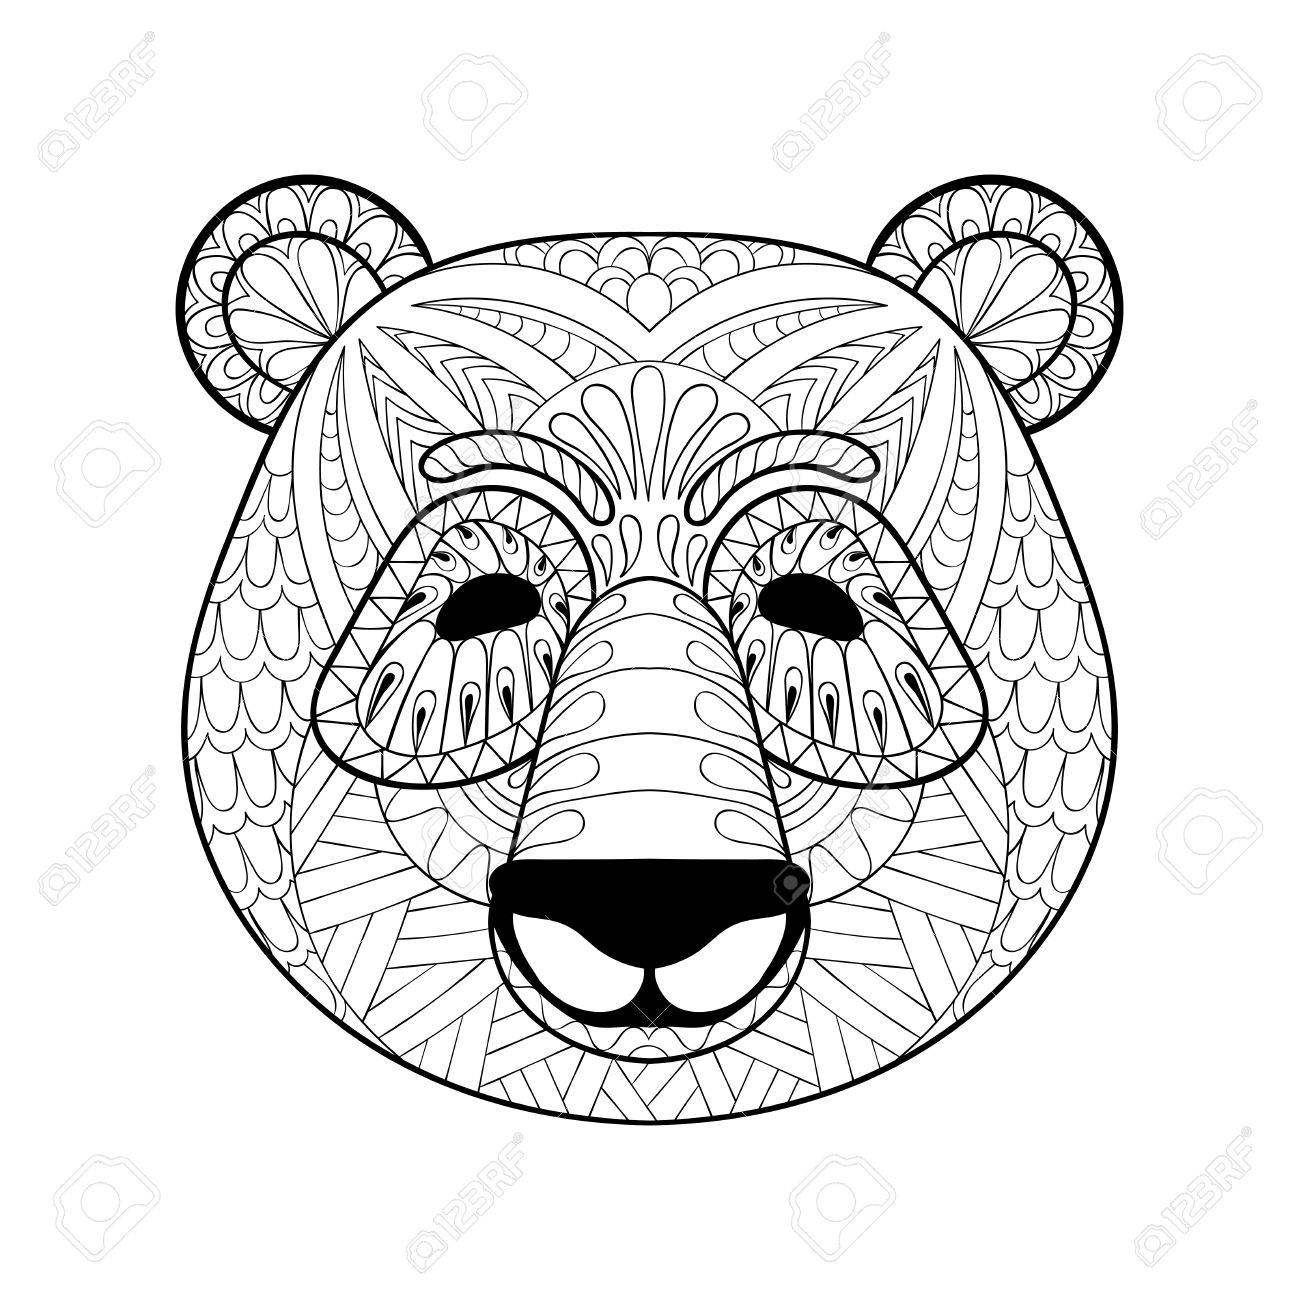 Head of panda in style freehand sketch for adult antistress coloring page with doodle elements ornamental artistic vector illustration for tattoo t